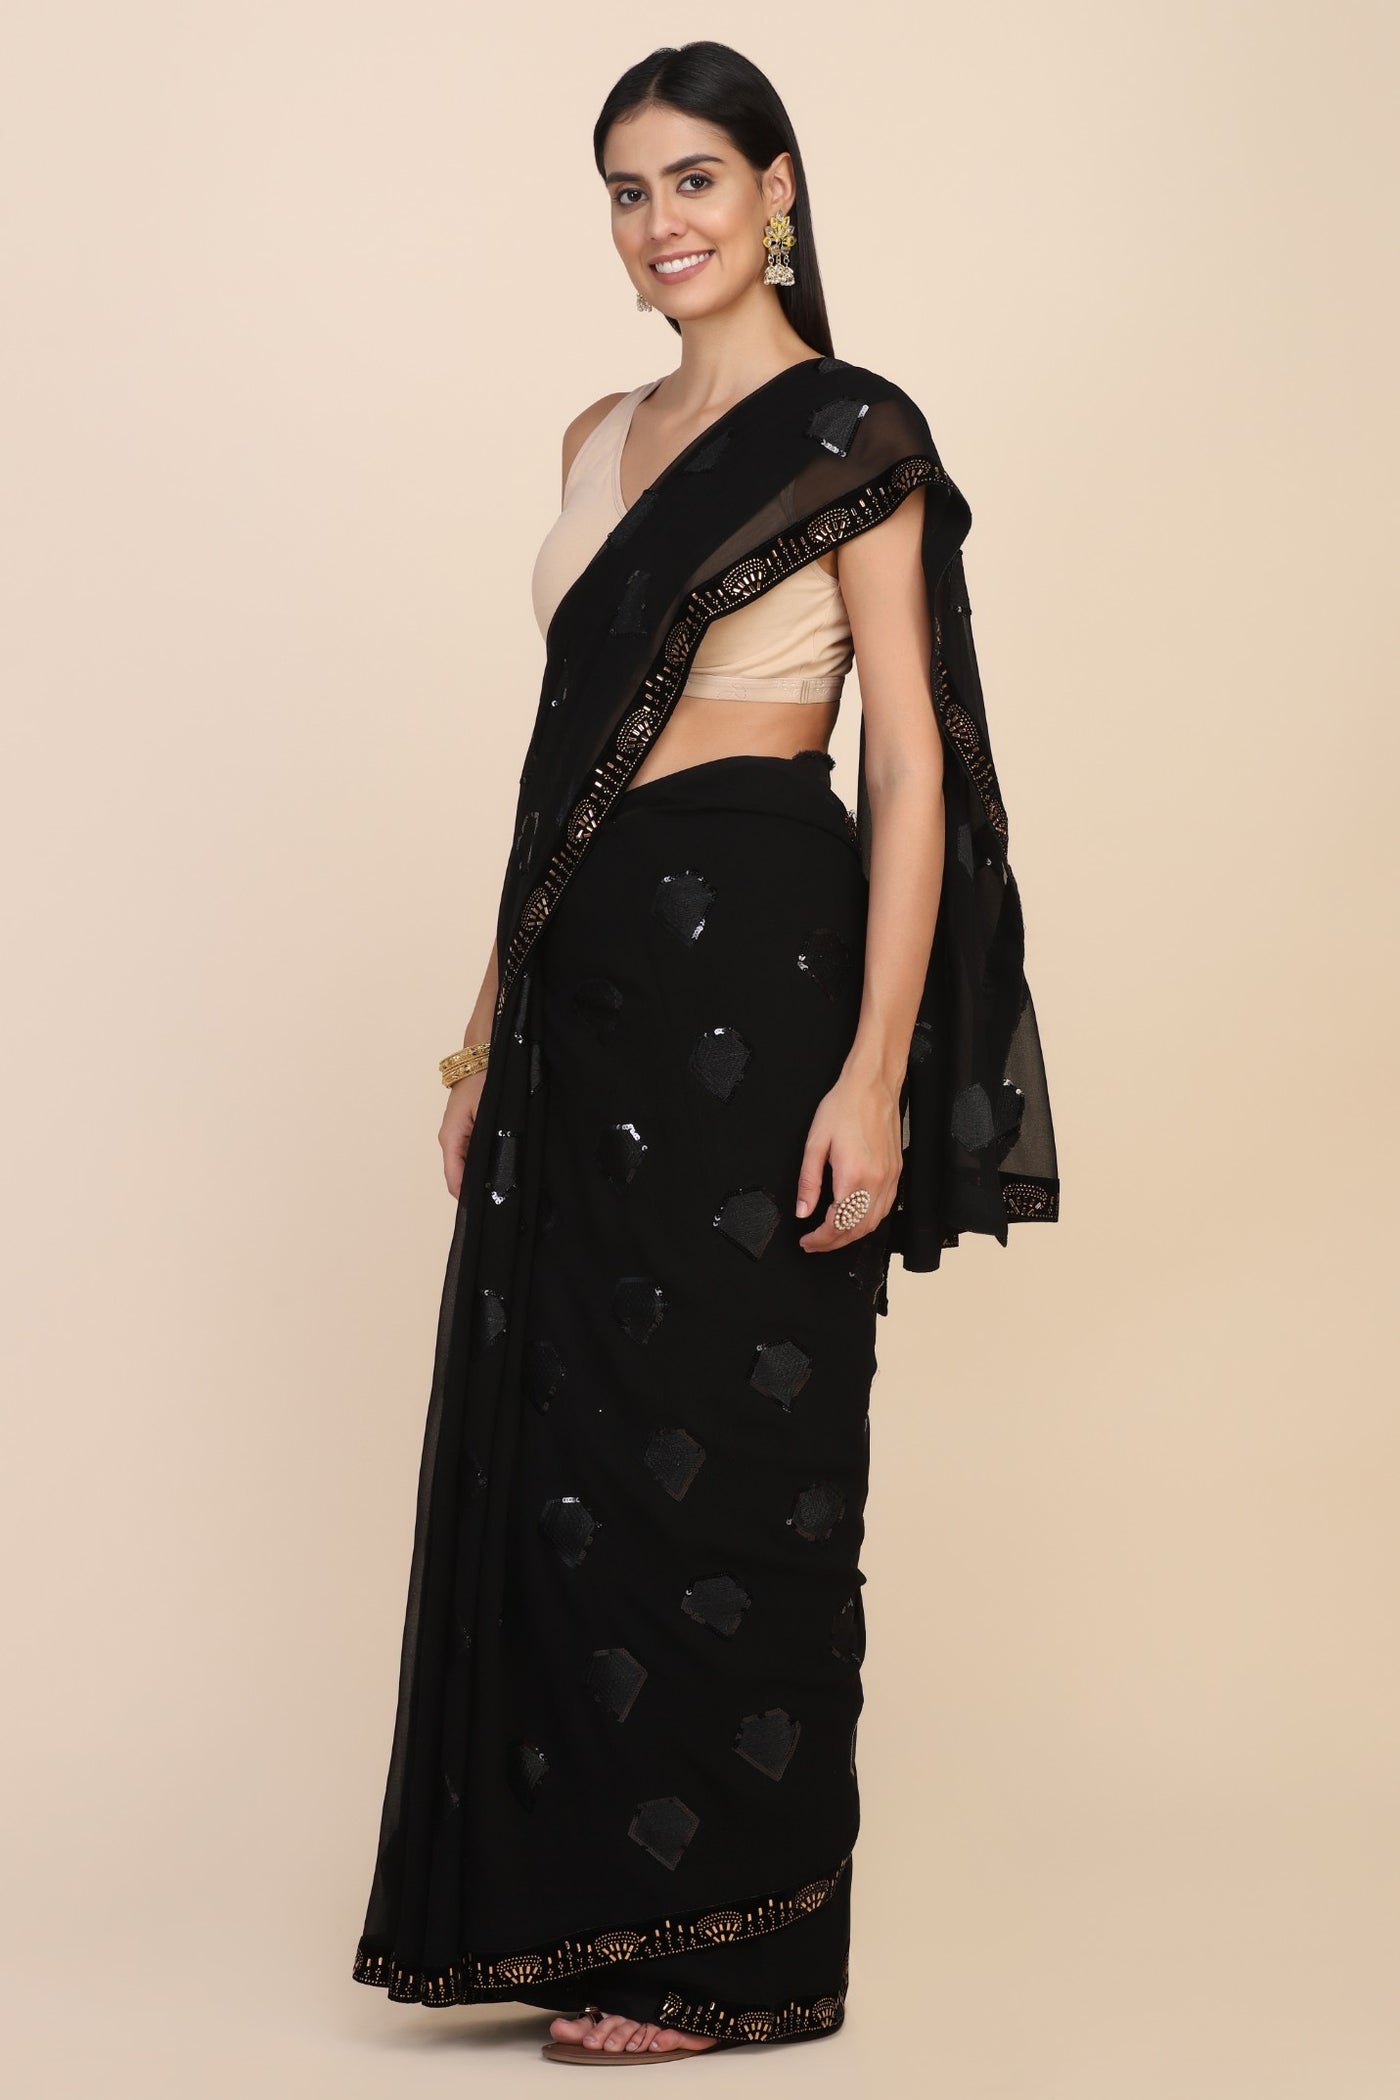 Classy black color geometrical motif embroidered saree